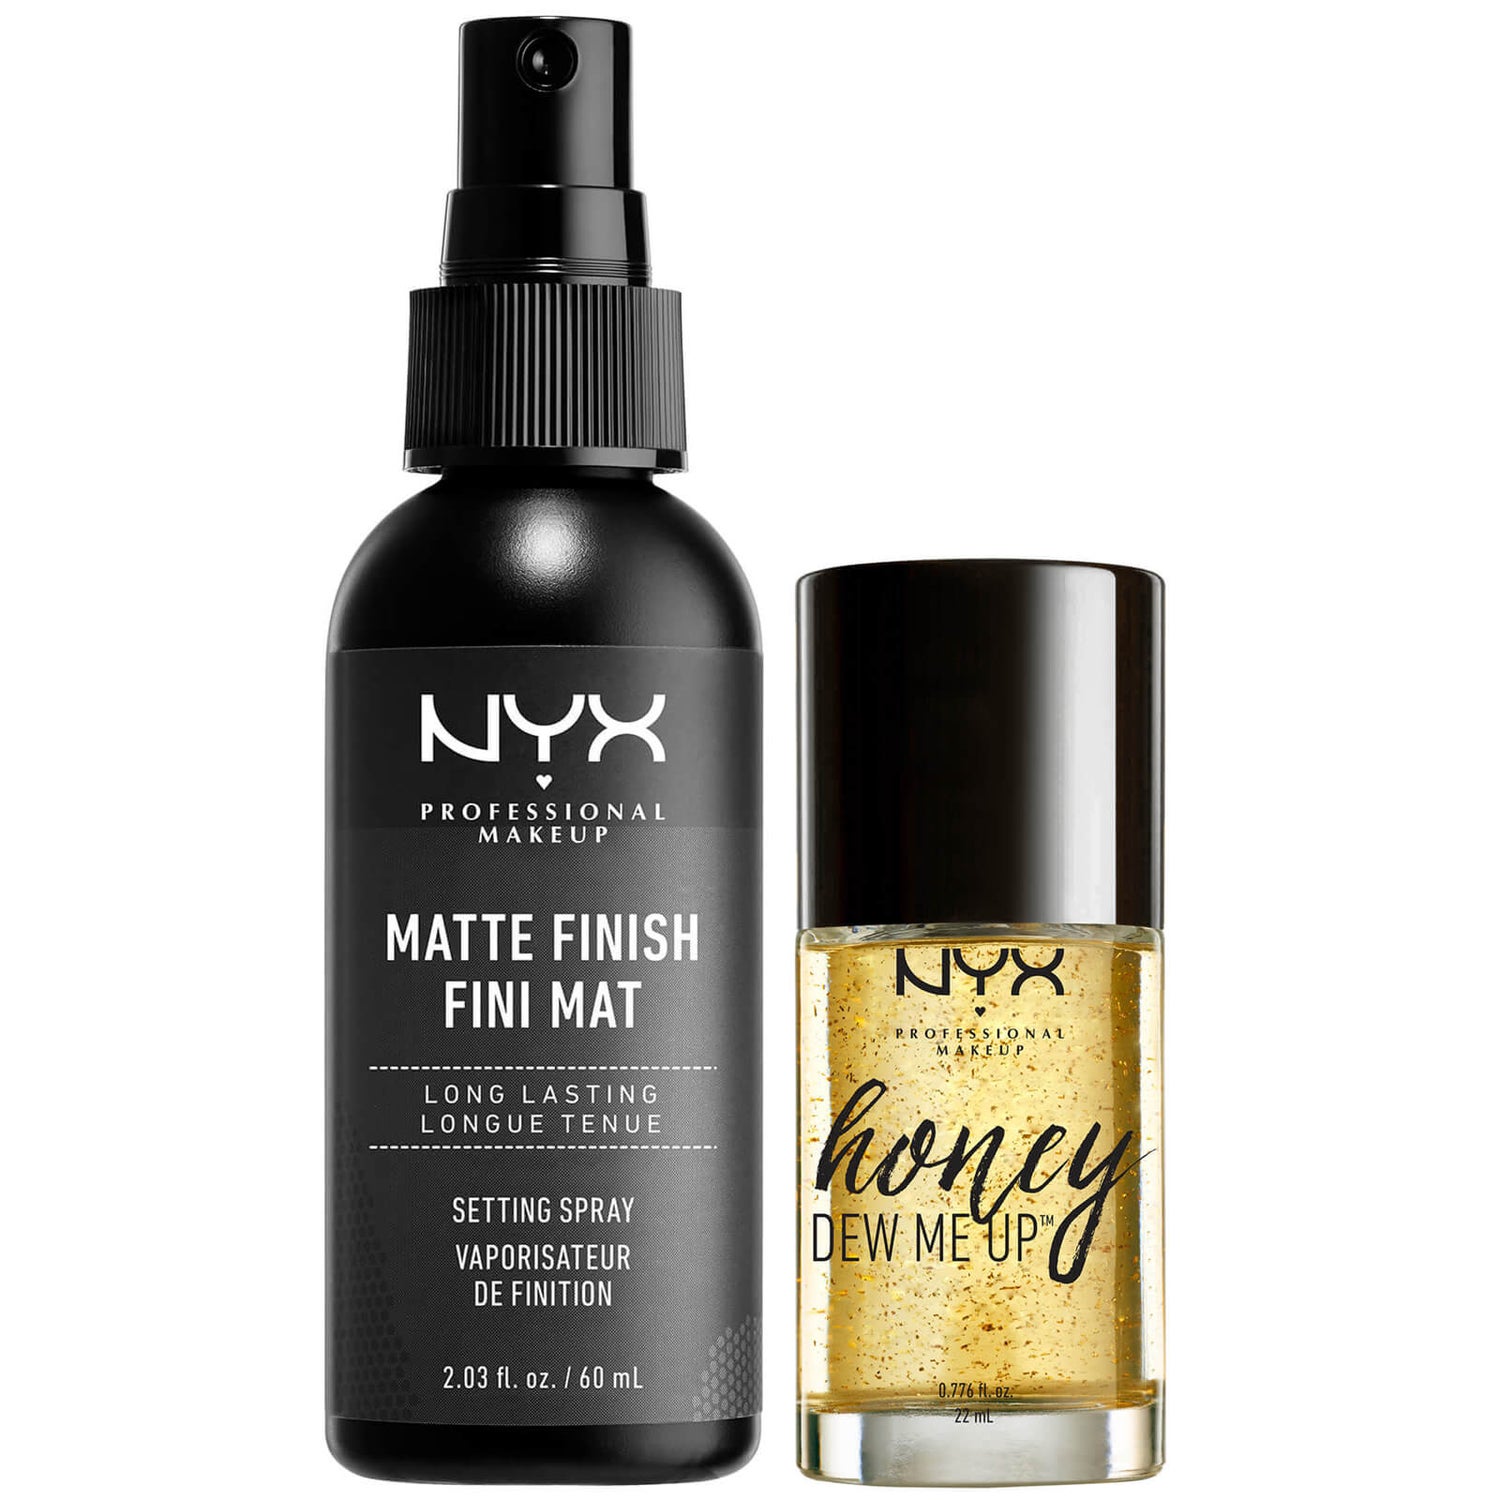 NYX Professional Makeup Honey Dew me Up Primer and Matte Setting Spray Duo  - FREE Delivery